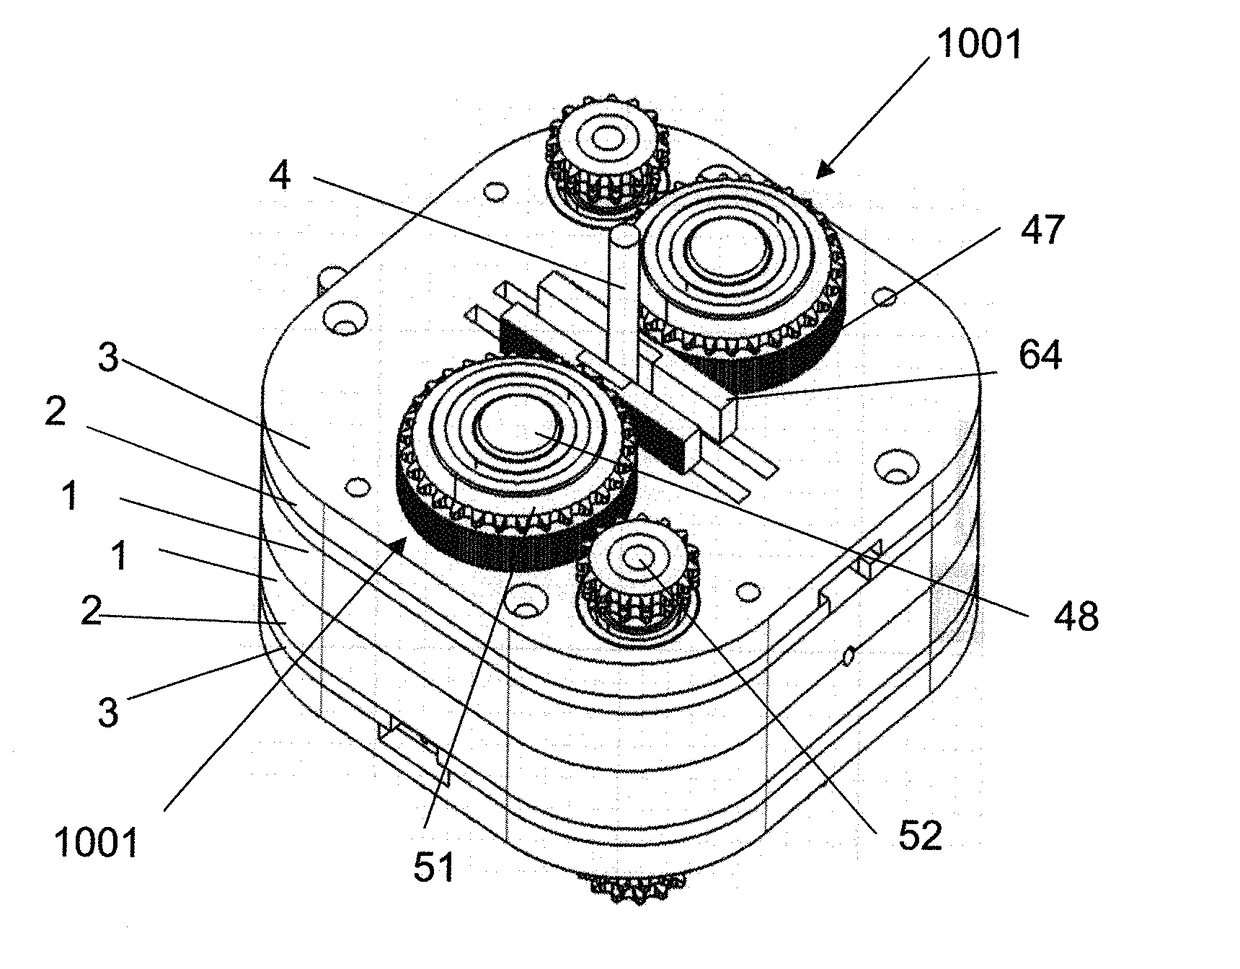 Continuous variable transmission with uniform input-to-output ratio that is non-dependent on friction